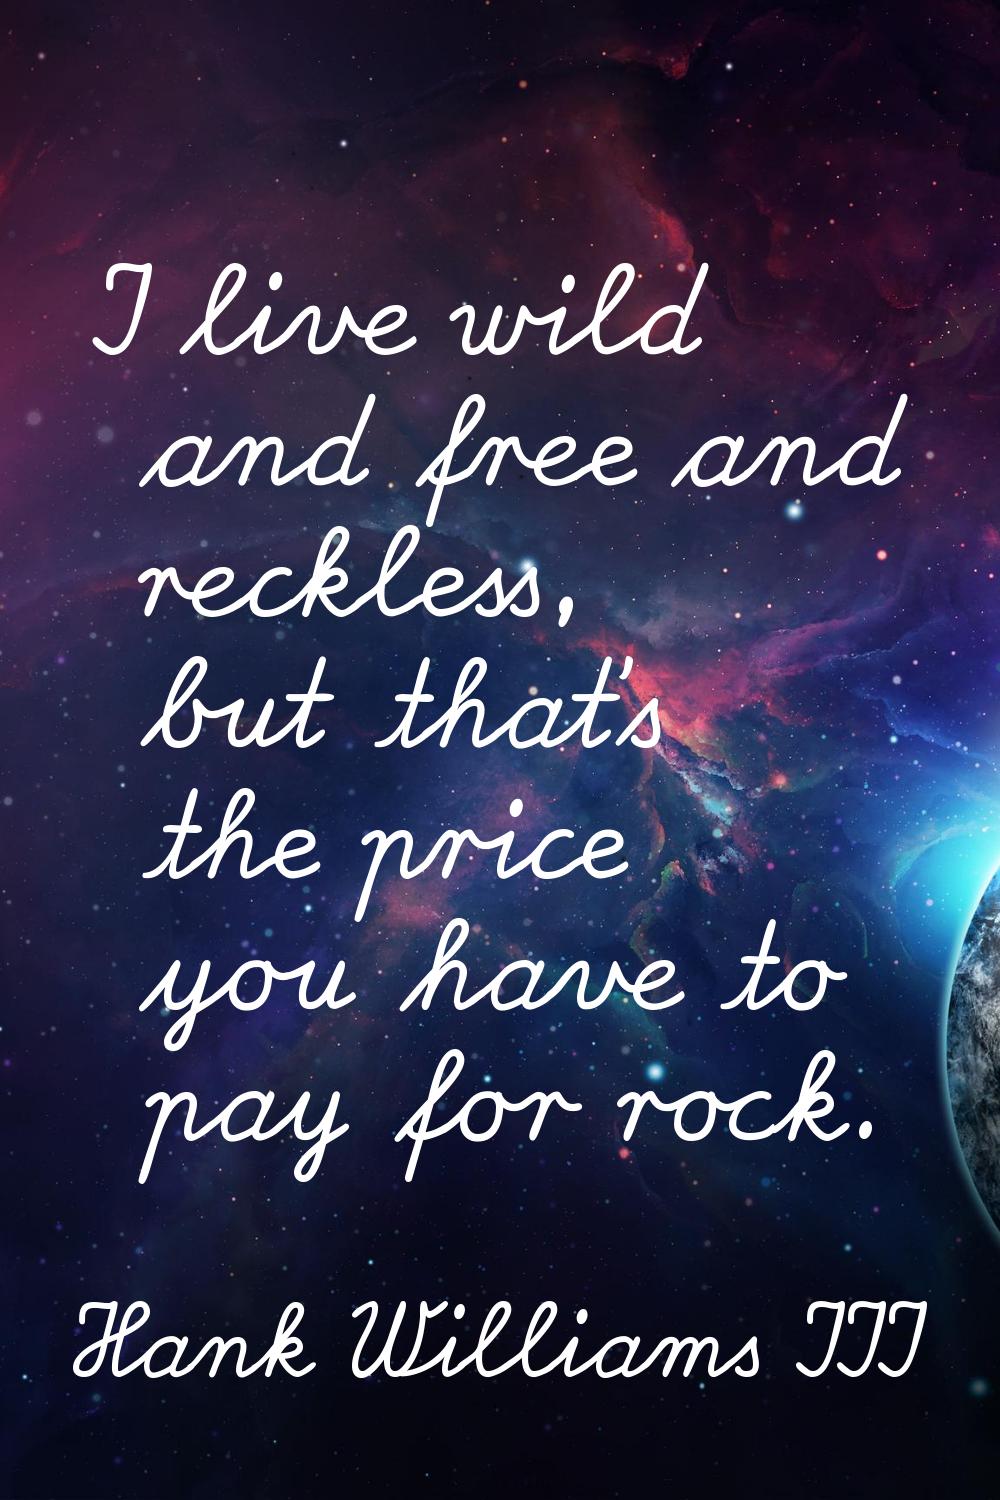 I live wild and free and reckless, but that's the price you have to pay for rock.